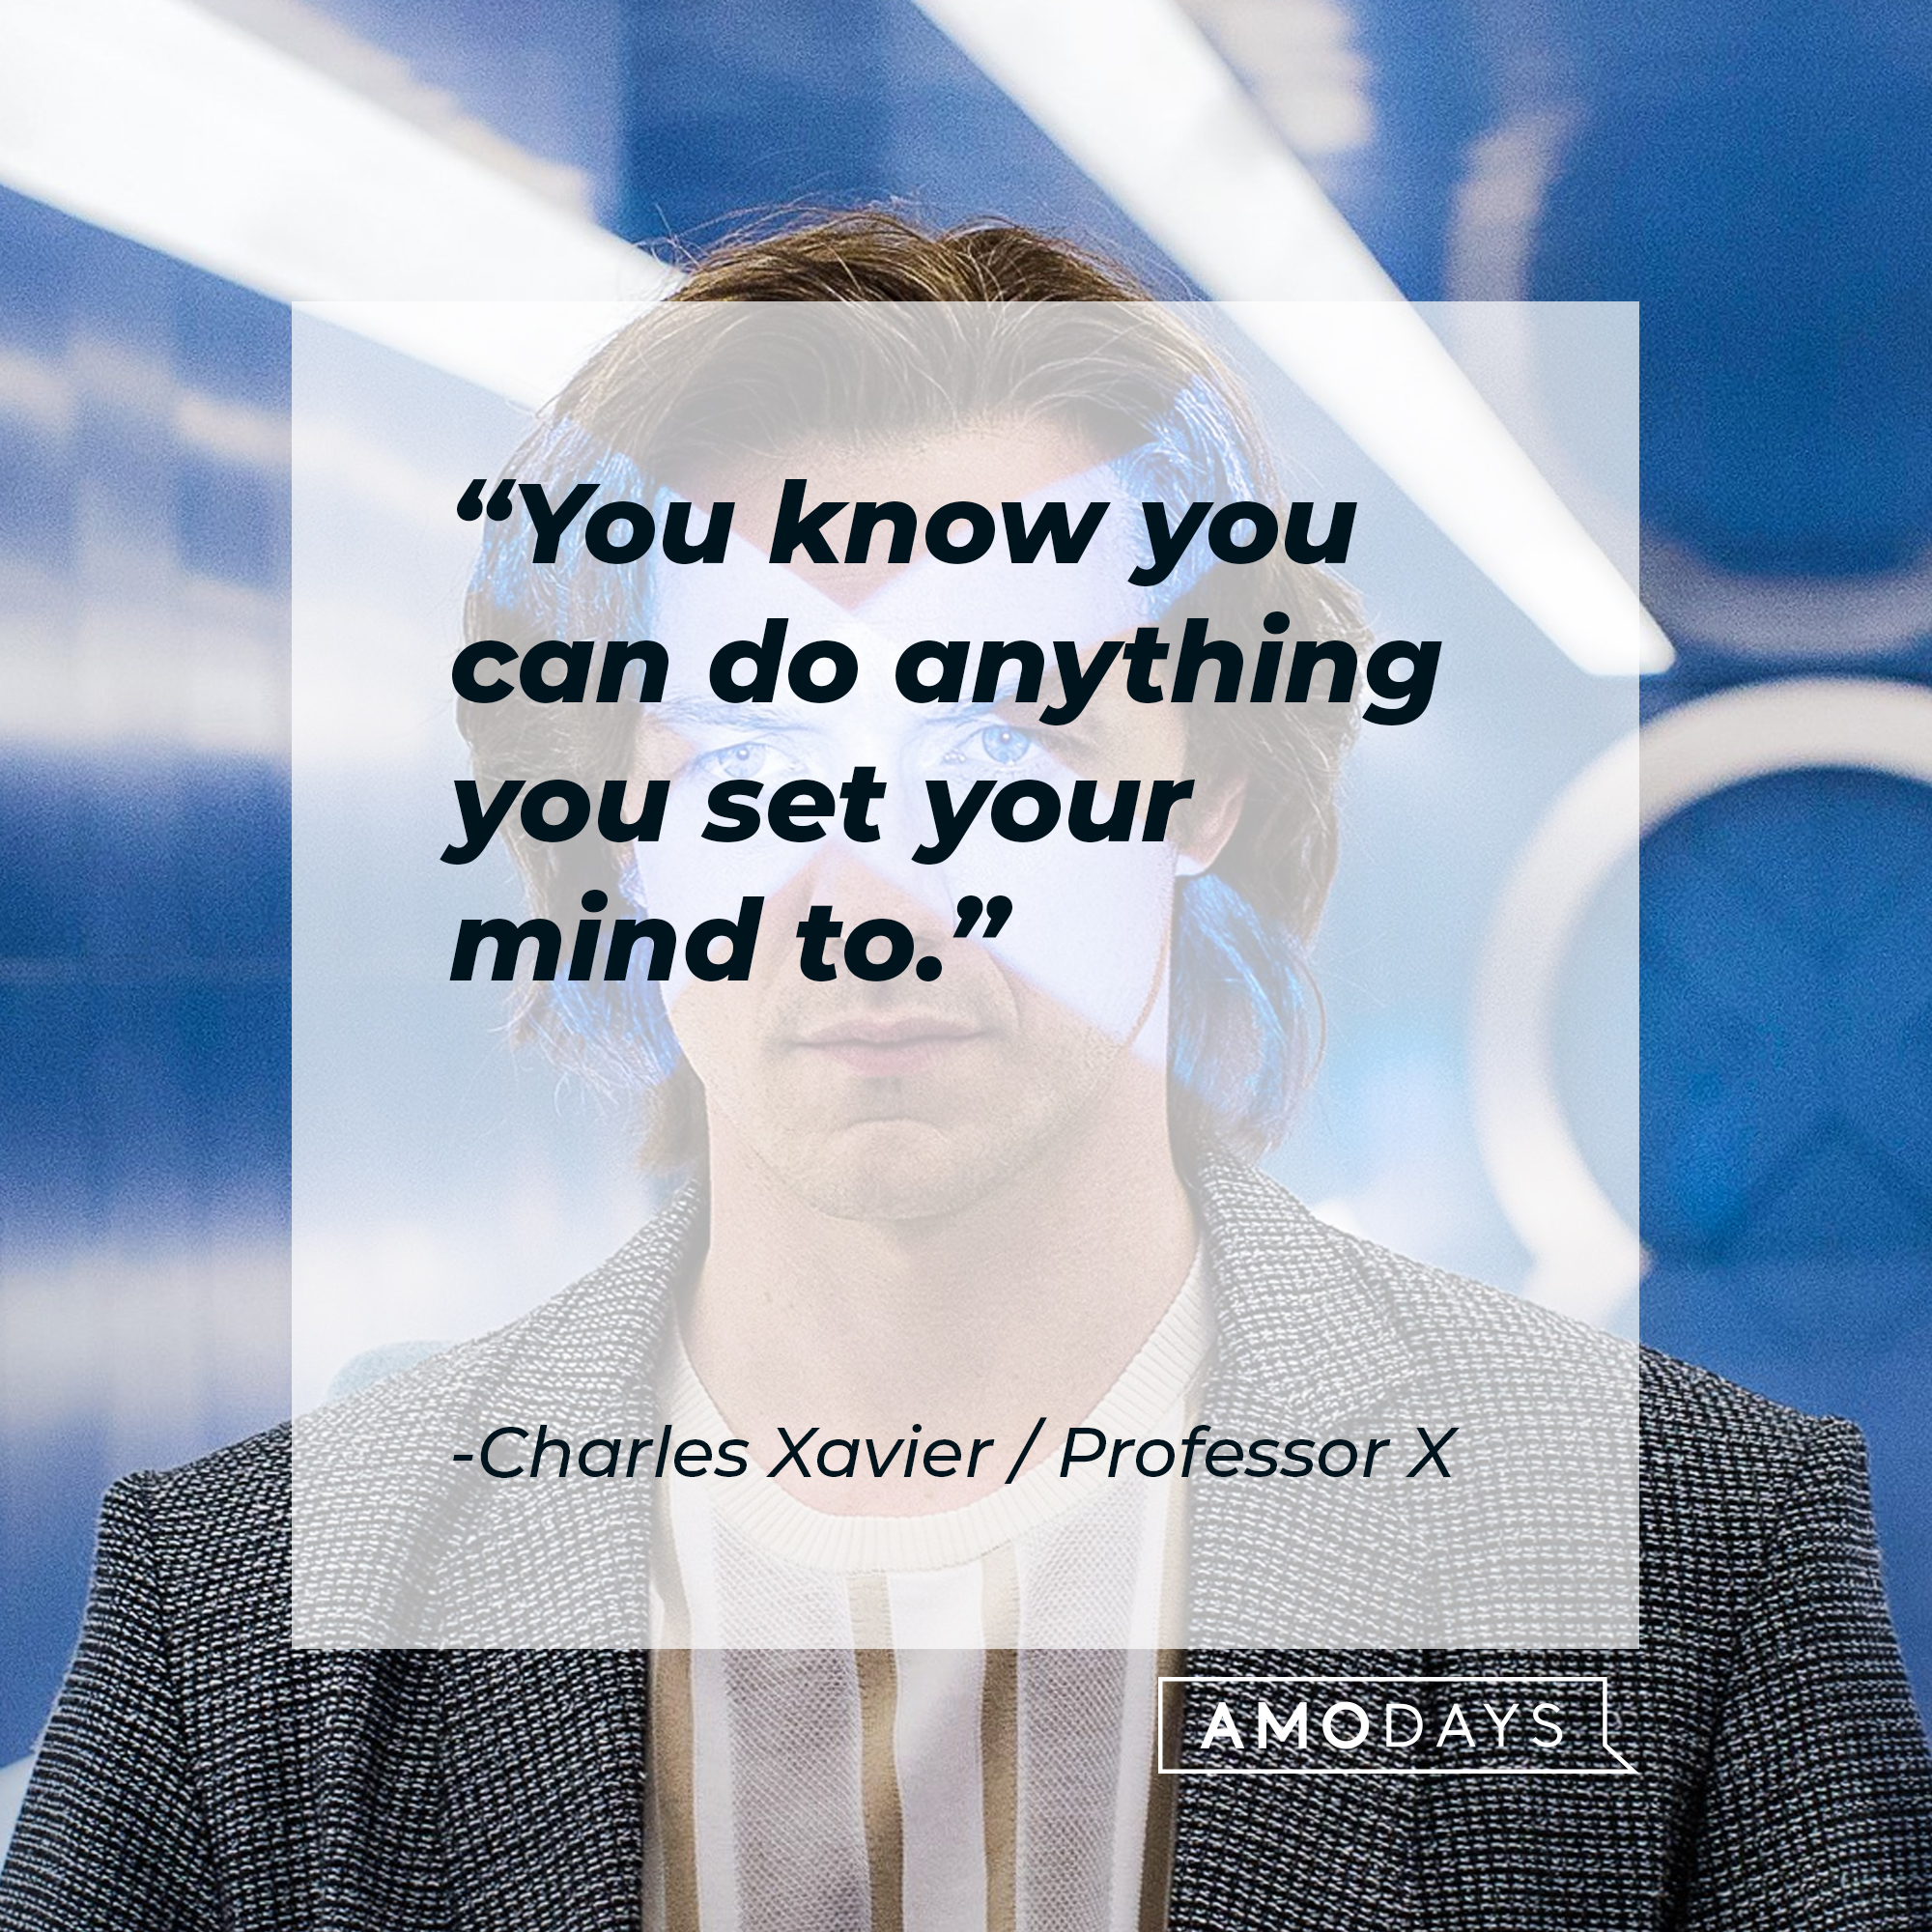 An image of a young Charles Xavier / Professor X, with his quote: "You know you can do anything you set your mind to." | Source: Facebook.com/xmenmovies